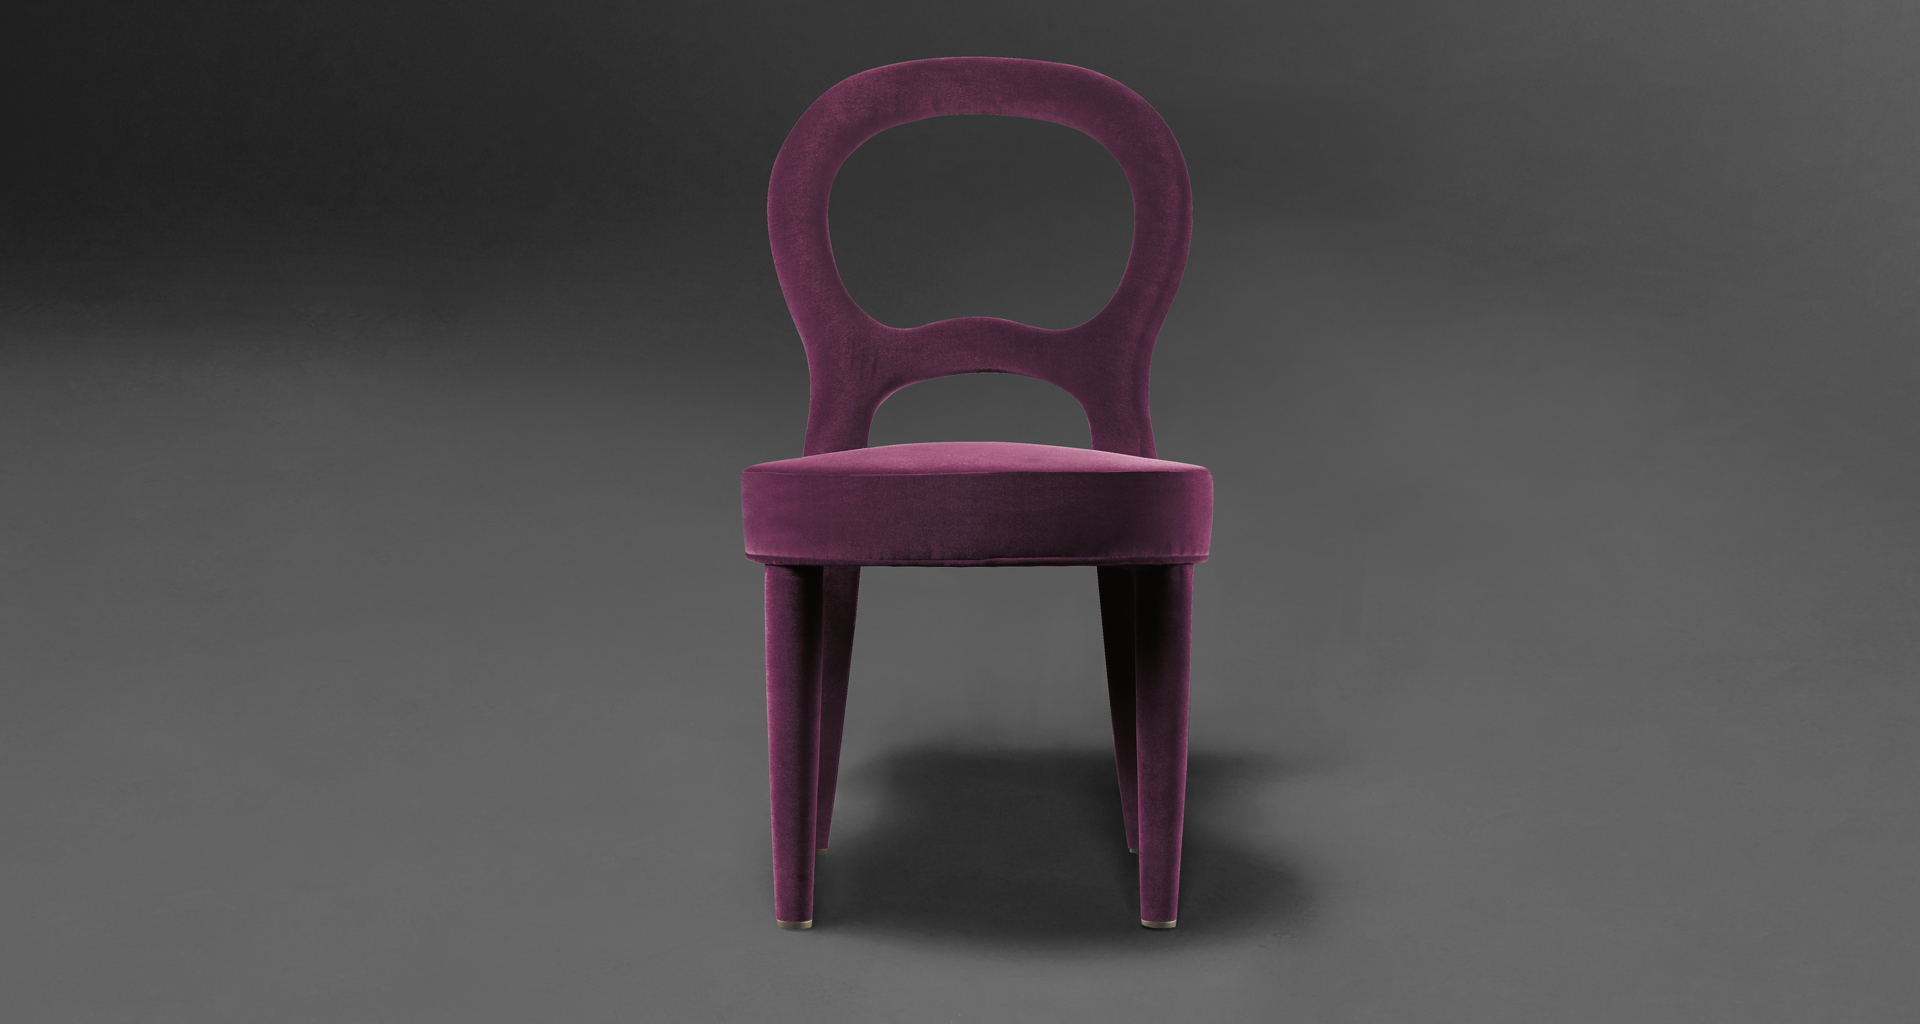 Bilou Bilou is a dining chair covered in velvet and linen or nappa leather available in different colors and in the versions standard, large and kids. Bilou Bilou is the most iconic dining chair from Promemoria's catalogue | Promemoria